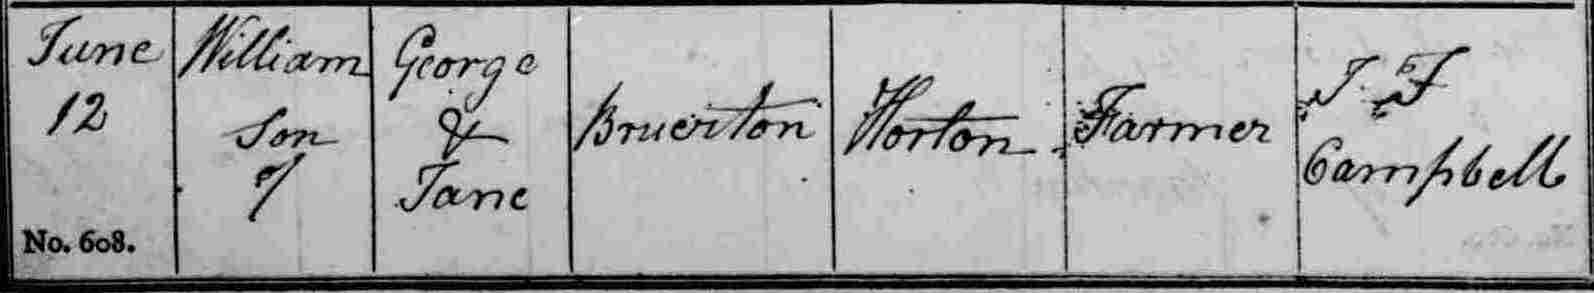 Taken on June 12th, 1836 in Horton and sourced from Certificate - Baptism.